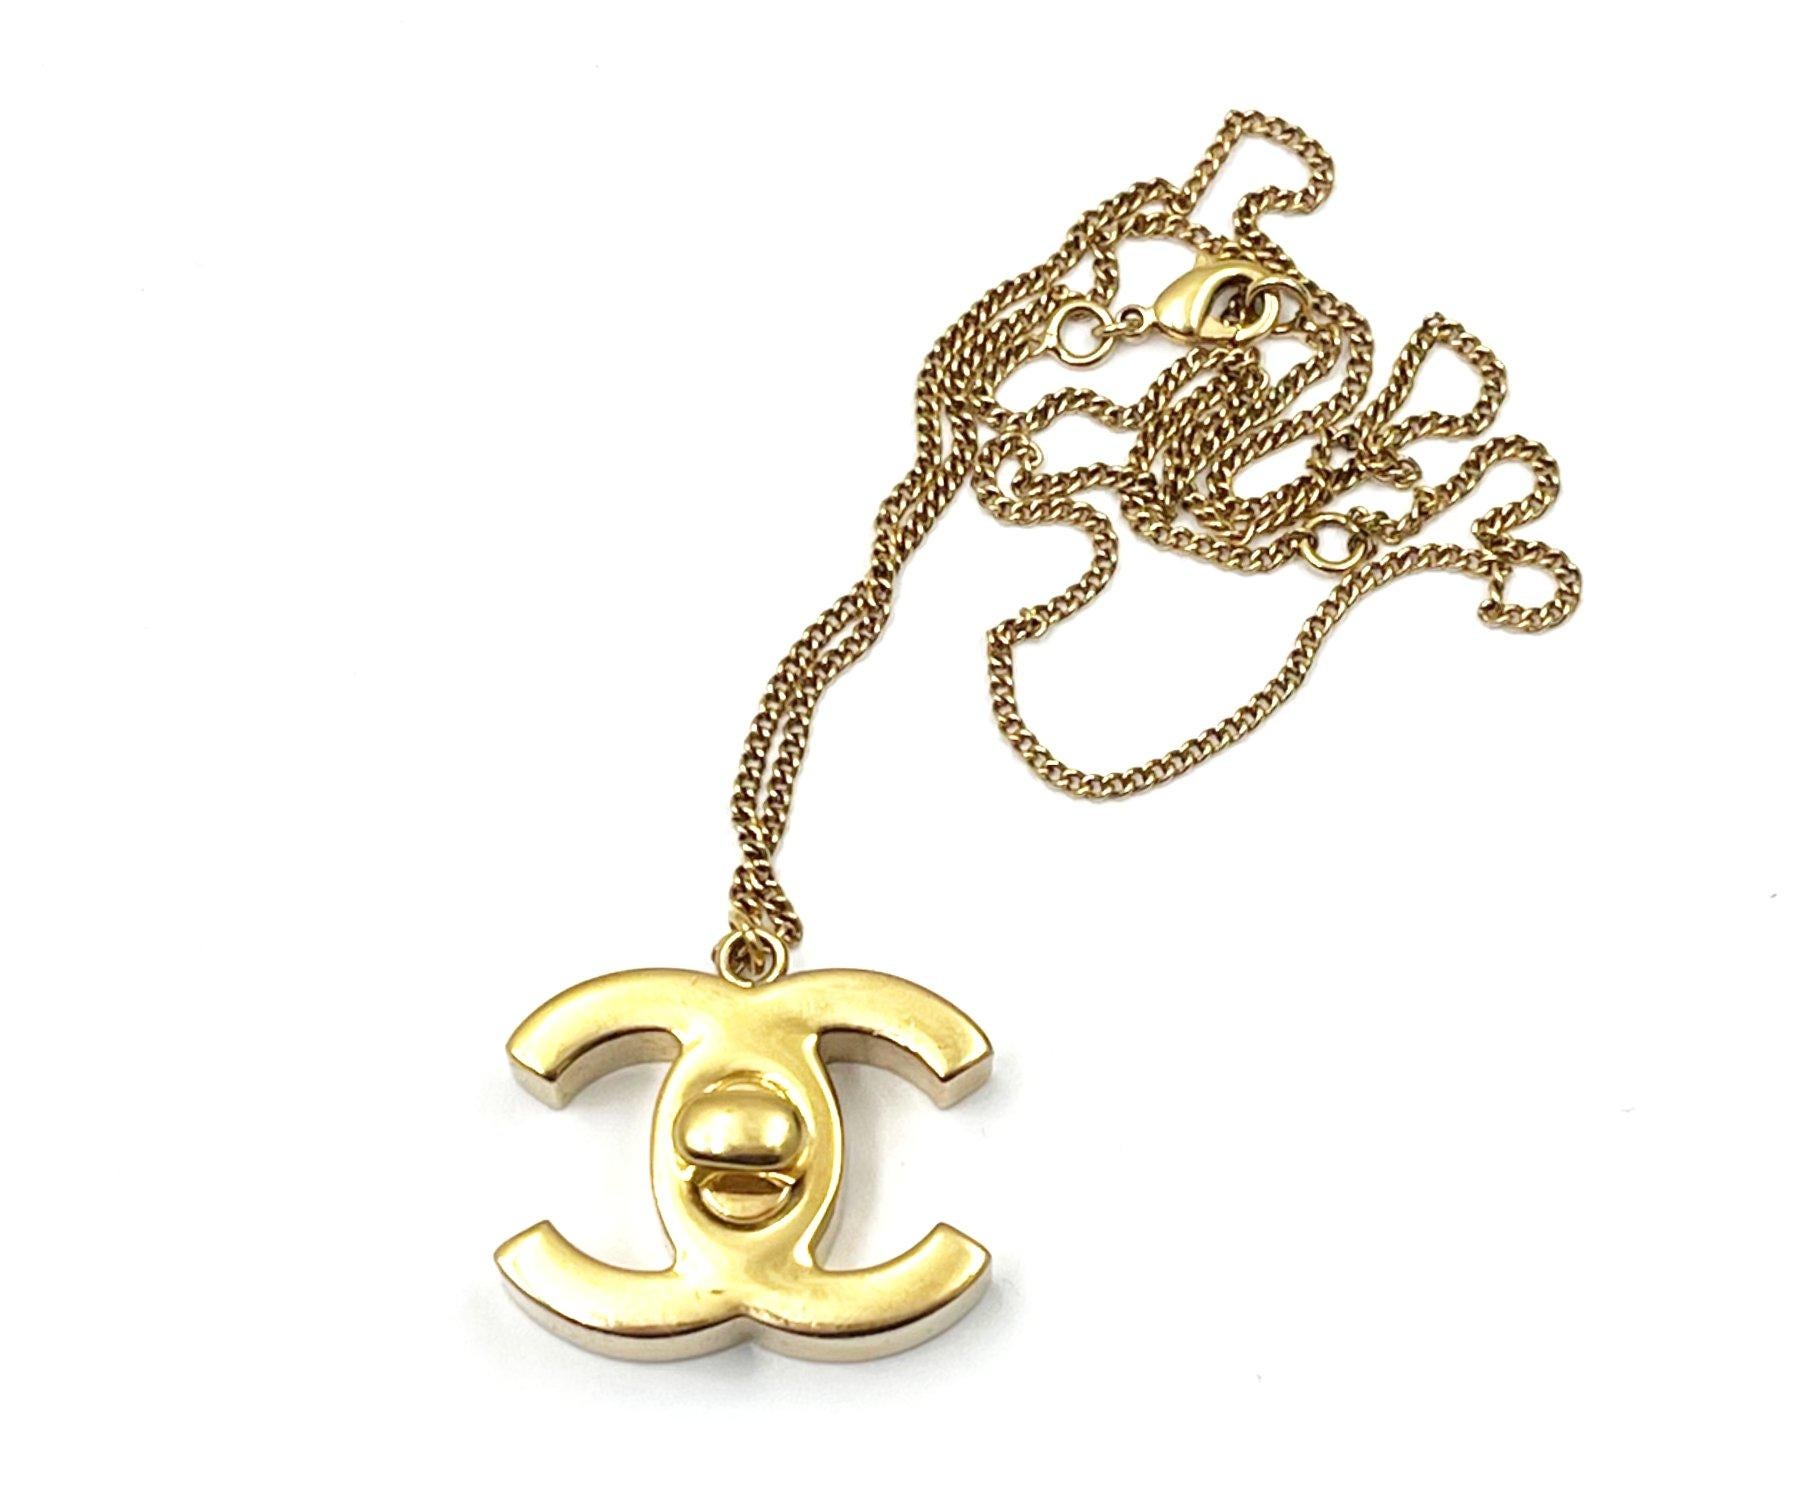 Chanel Classic Iconic Gold CC Turnlock Large Pendant Necklace

* Marked 09
* Made in Italy
* Comes with the original box

-The pendant is approximately 1.25